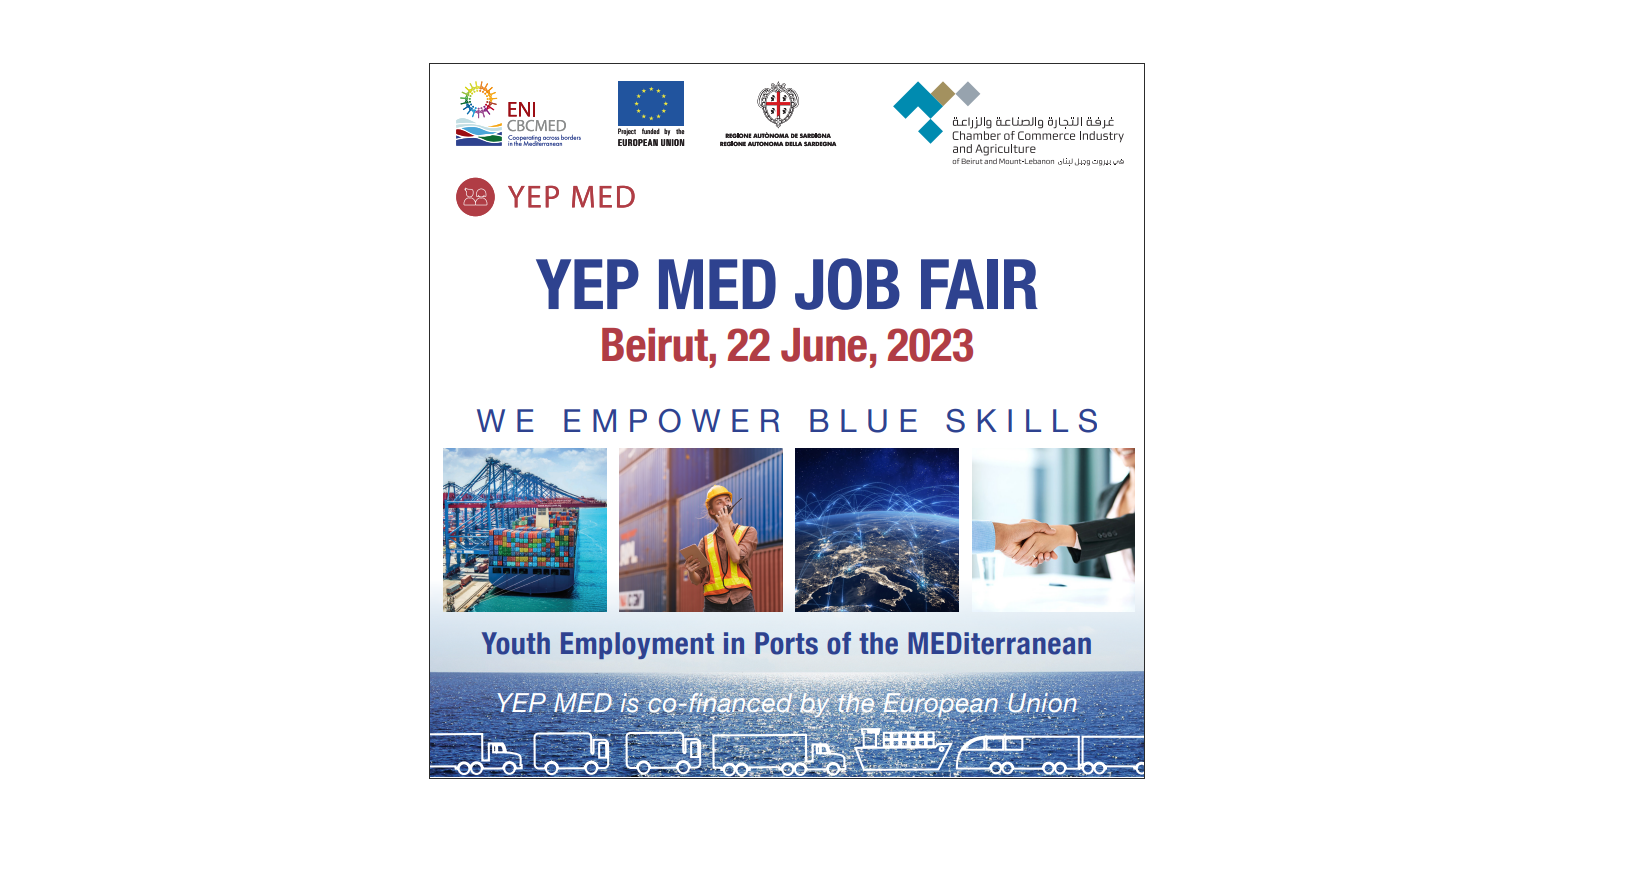 YEP MED JOB Fair in Beirut connects trainees with port logistics employers